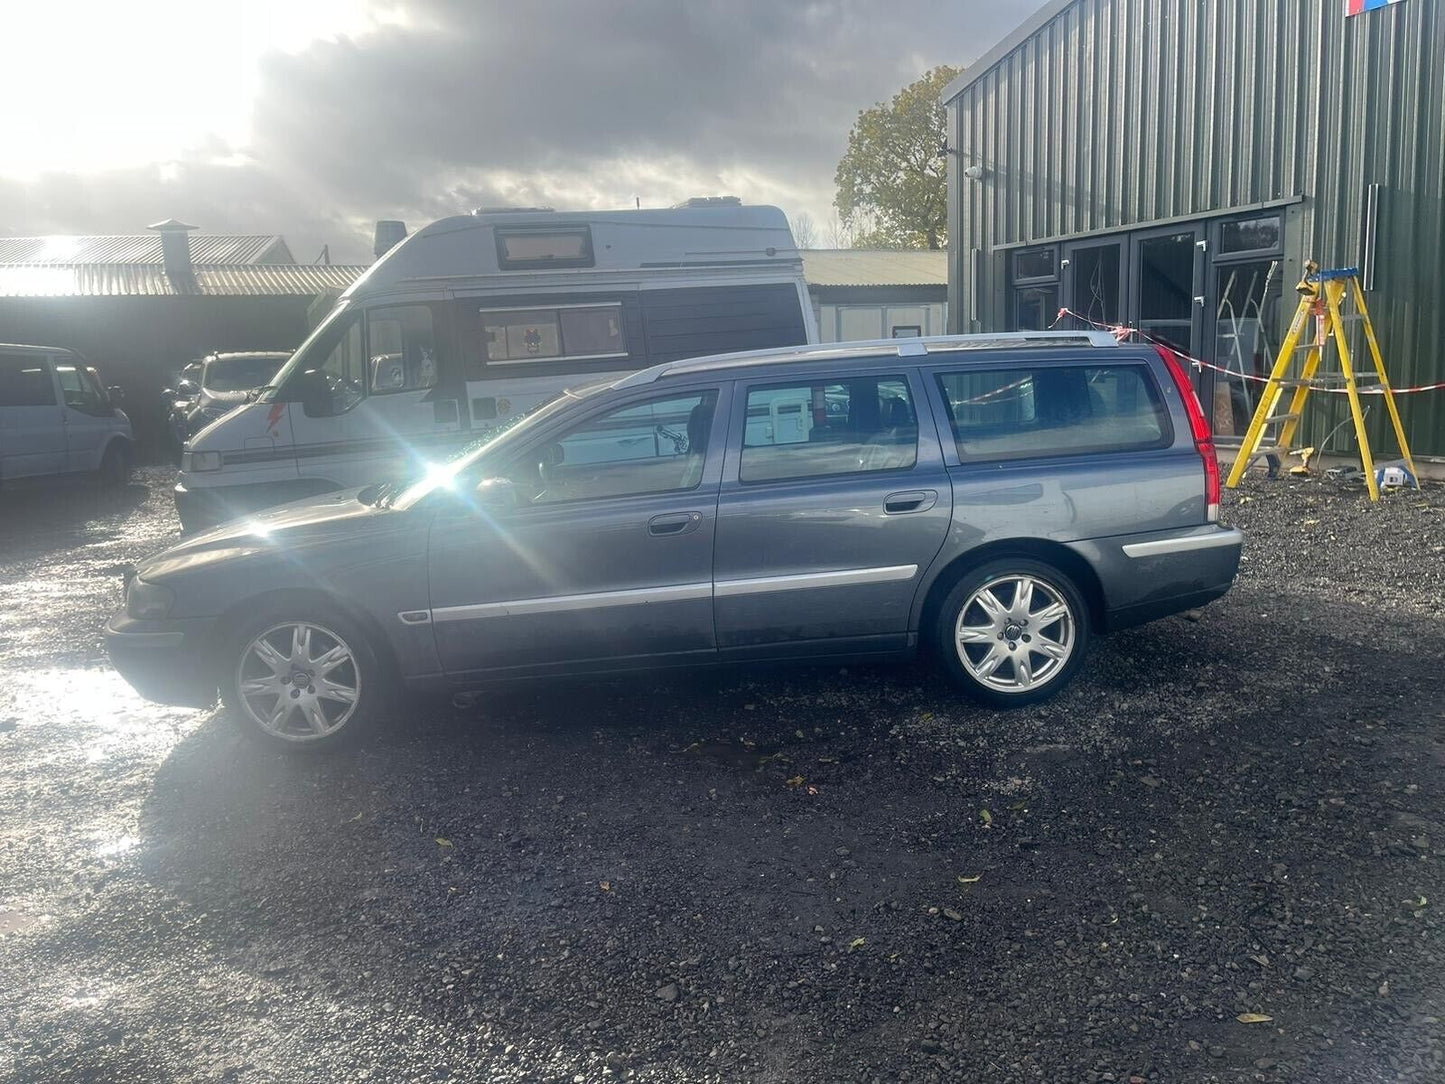 Bid on RELIABLE ADVENTURE: 2003 VOLVO V70 D5 TURBO DIESEL - DRIVEN FROM FRANCE - NO VAT ON HAMMER- Buy &amp; Sell on Auction with EAMA Group